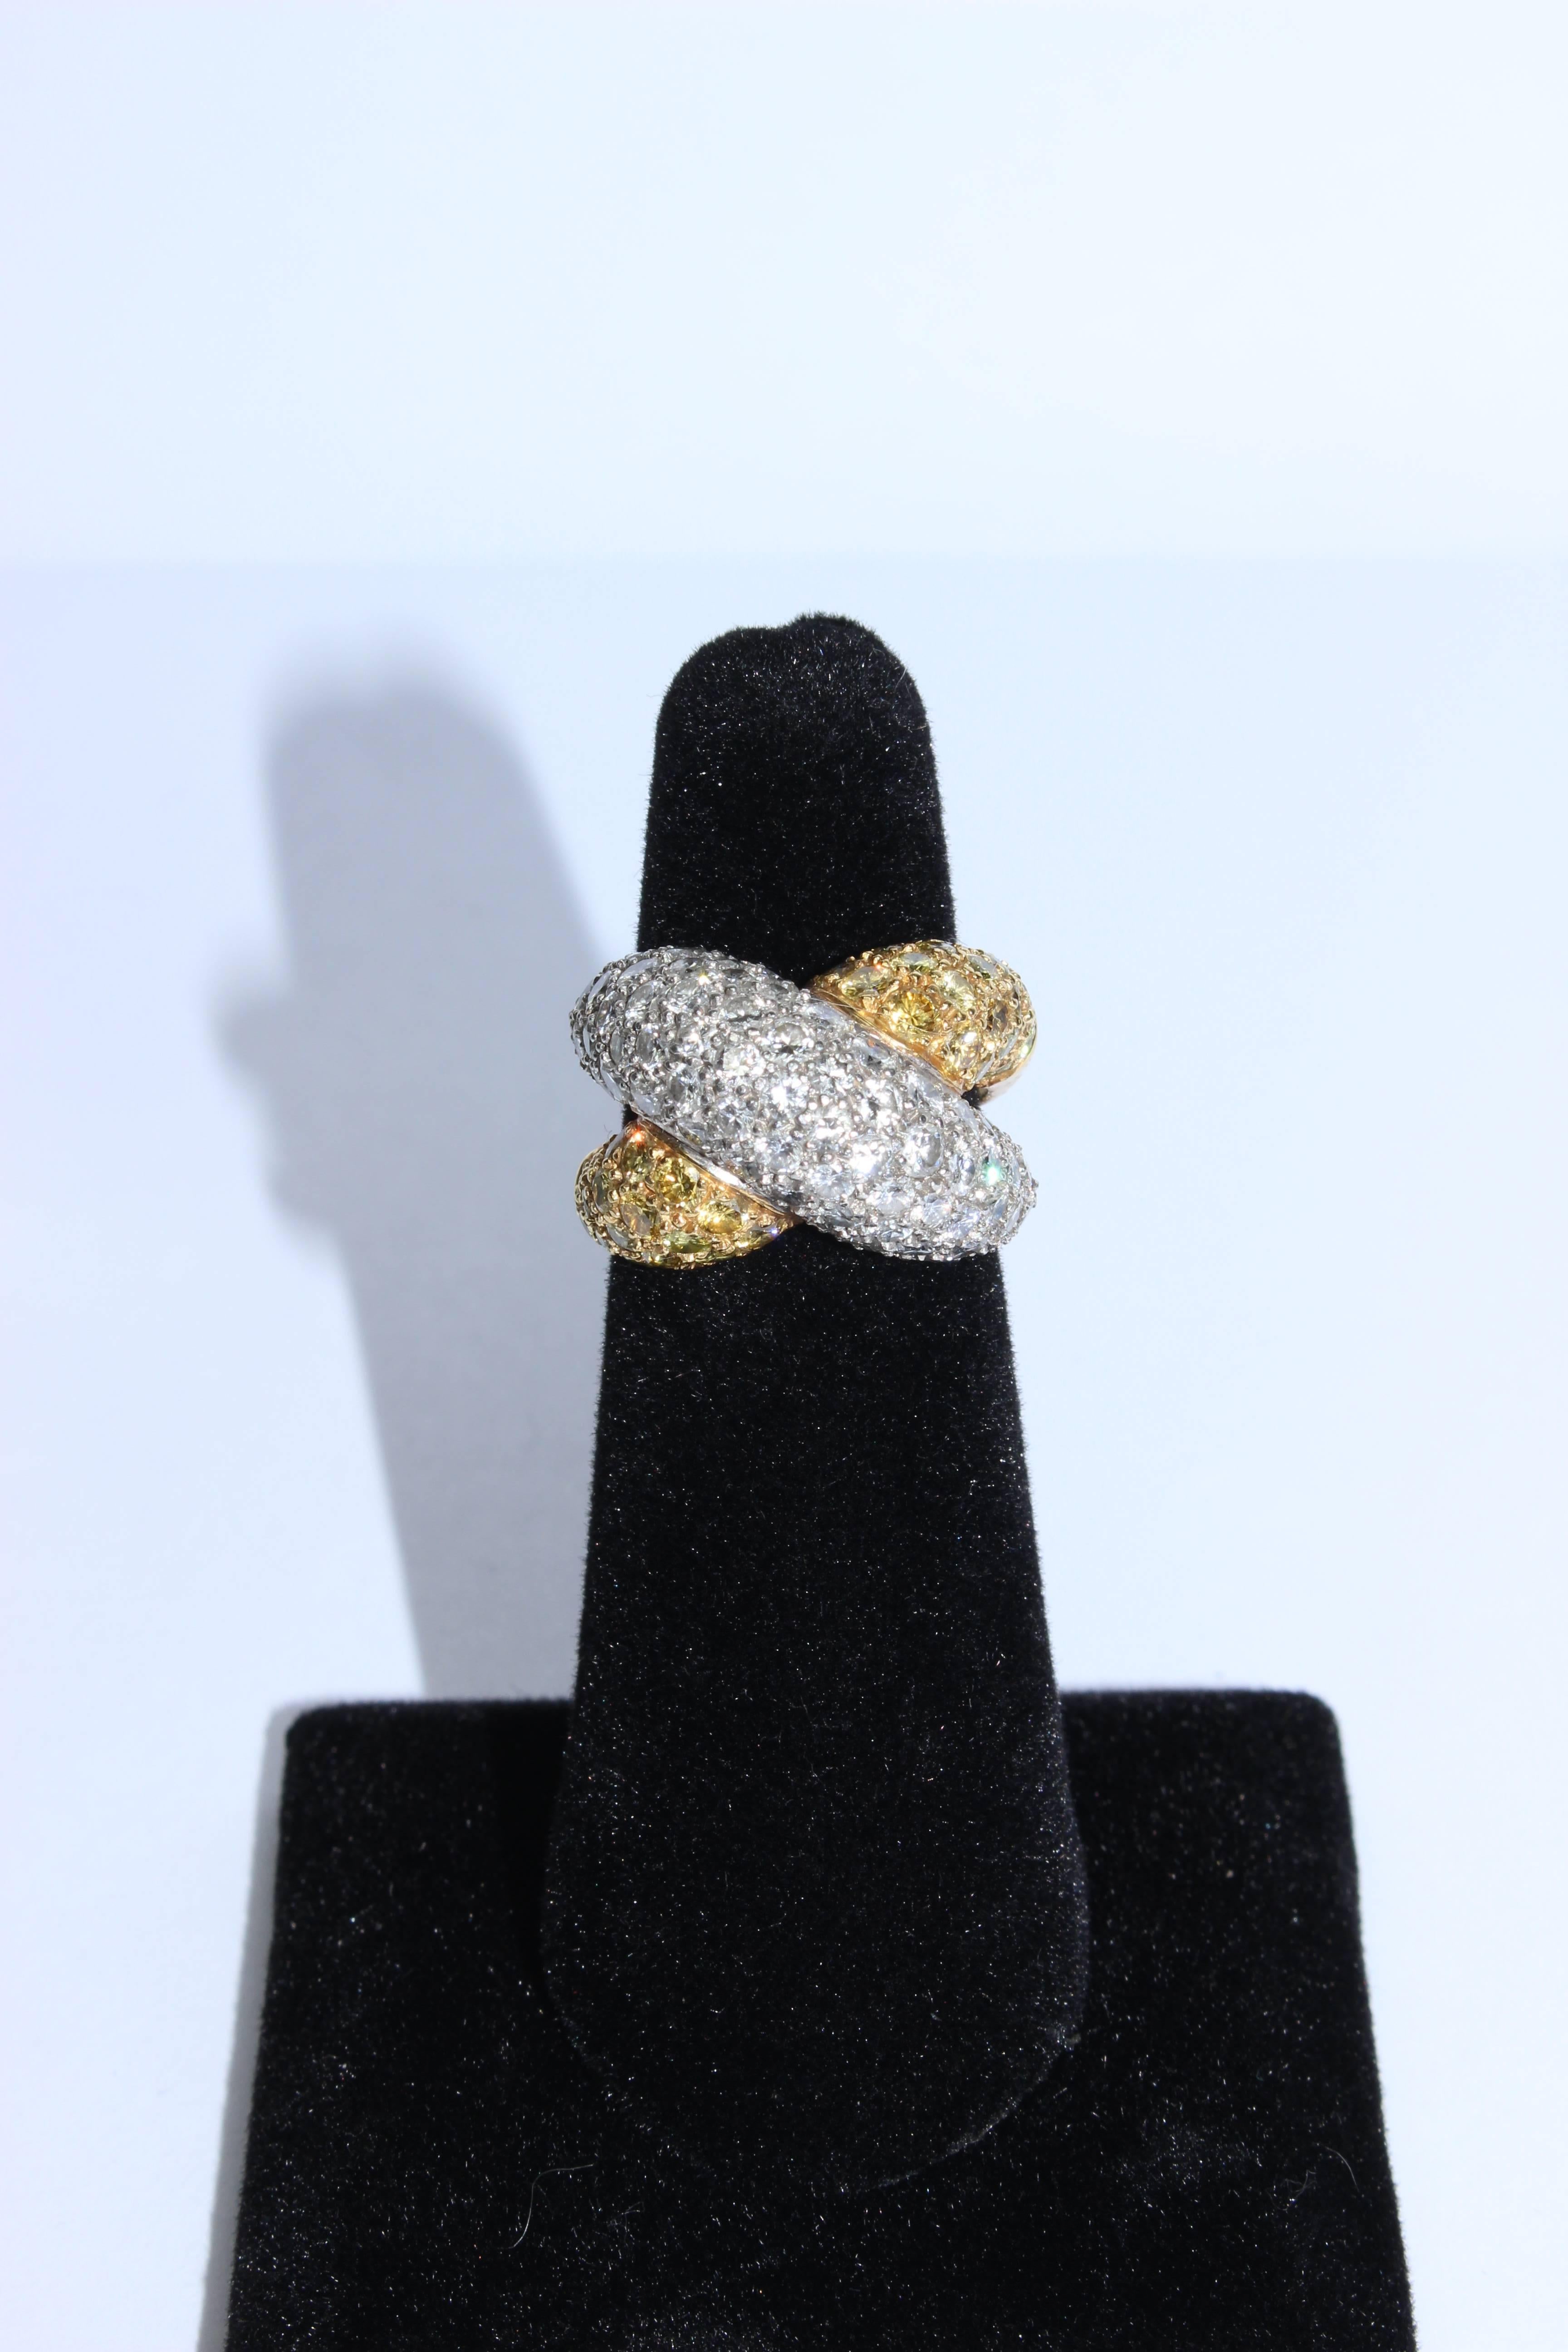 This 14KT pave ring is composed of 14KT yellow and white gold, which features yellow and white pave diamonds (.05mm) in a crisscross band design. An absolutely stunning design, in excellent vintage condition.

Specs: 
14KT Yellow & White